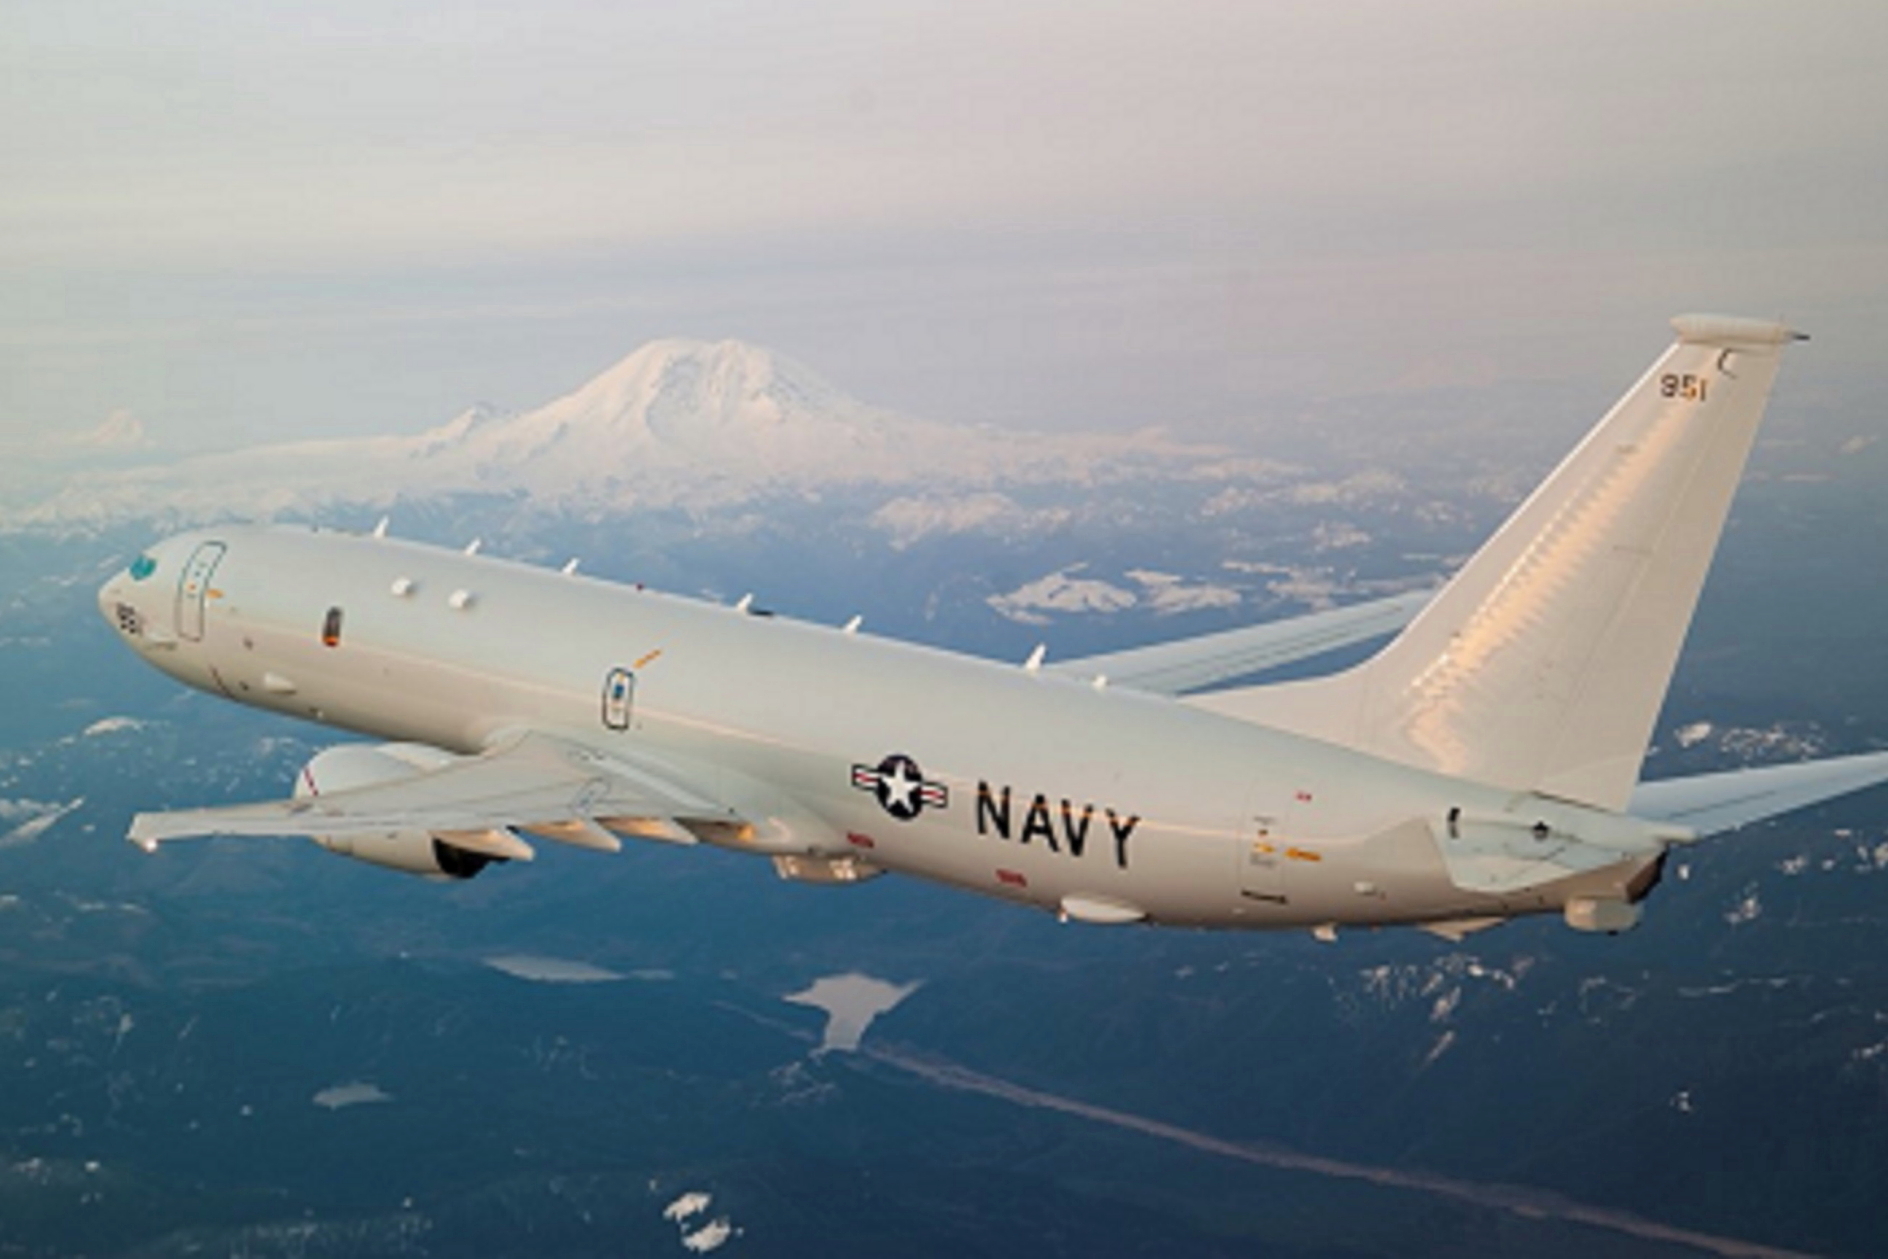 A military derivative of the Boeing 737 Next-Generation airplane, the P-8 is militarized with maritime weapons, a modern open mission system architecture and commercial-like support for affordability. The P-8 shares 86% commonality with the commercial 737NG. Click to enlarge.